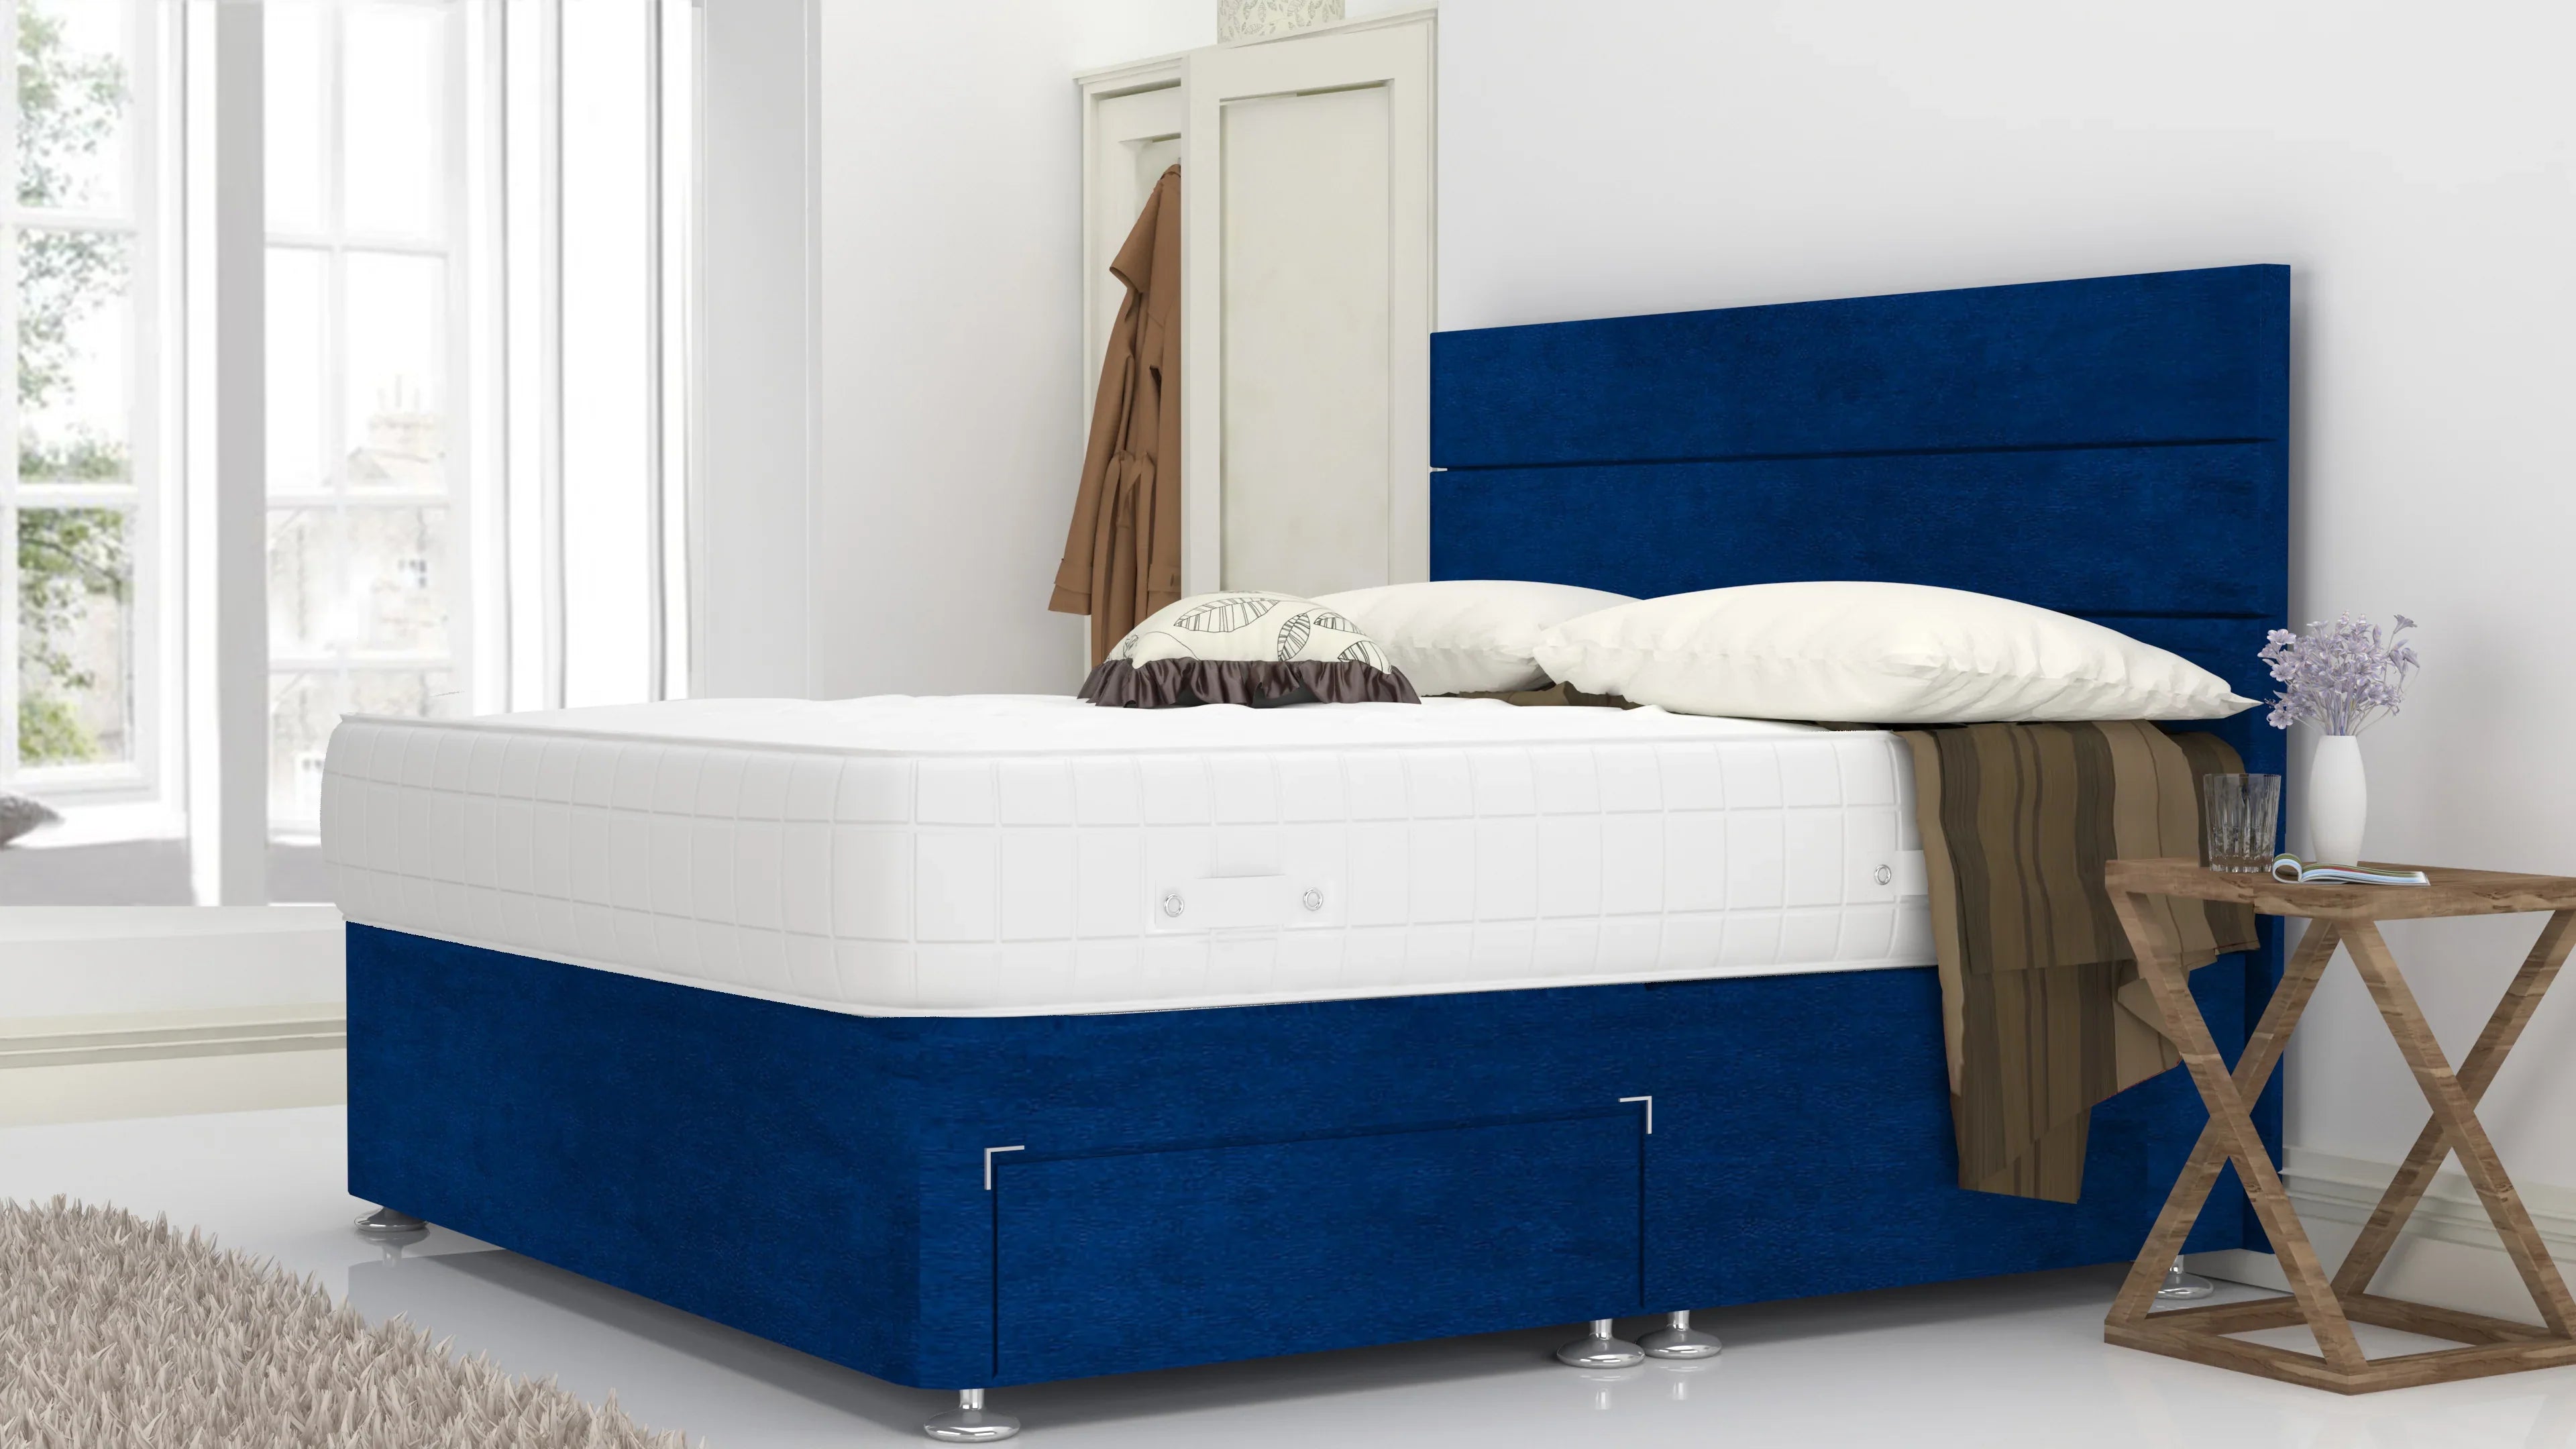 Blue Plush 6 Feet Divan Bed Set With 3 Panel Headboard (Included Feet) And Free Pillow Top Mattress